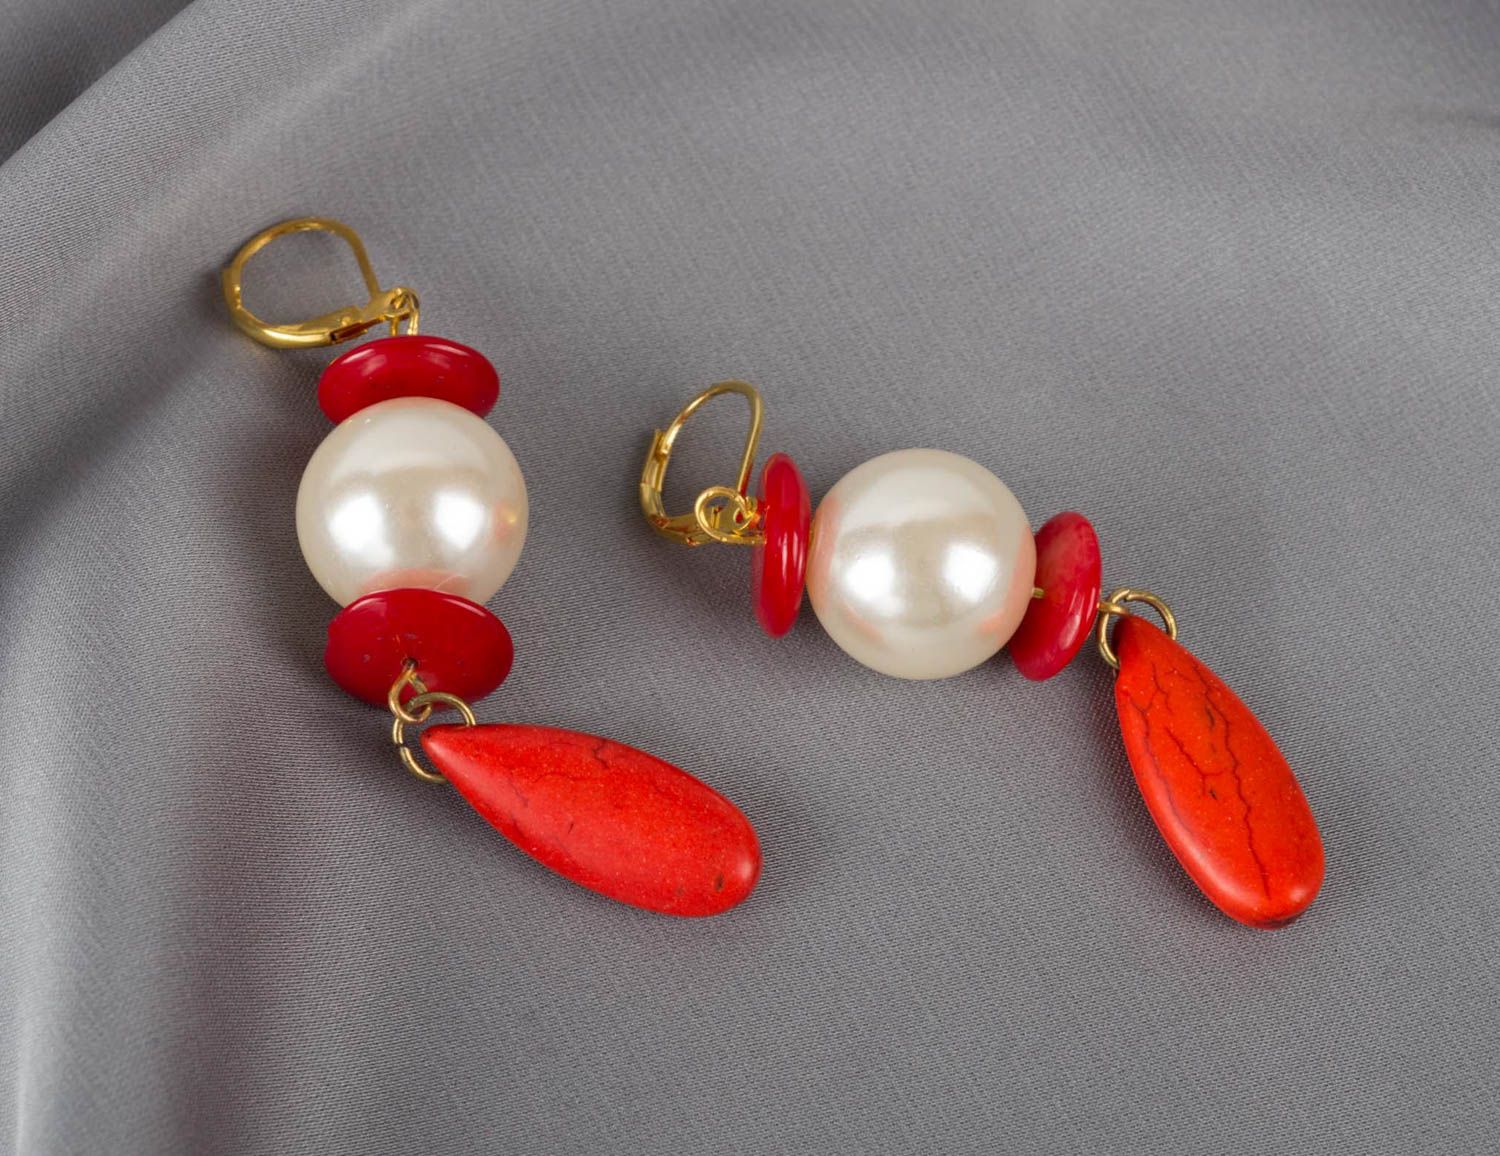 Handmade female earrings beaded red and white accessories earrings with charms photo 1